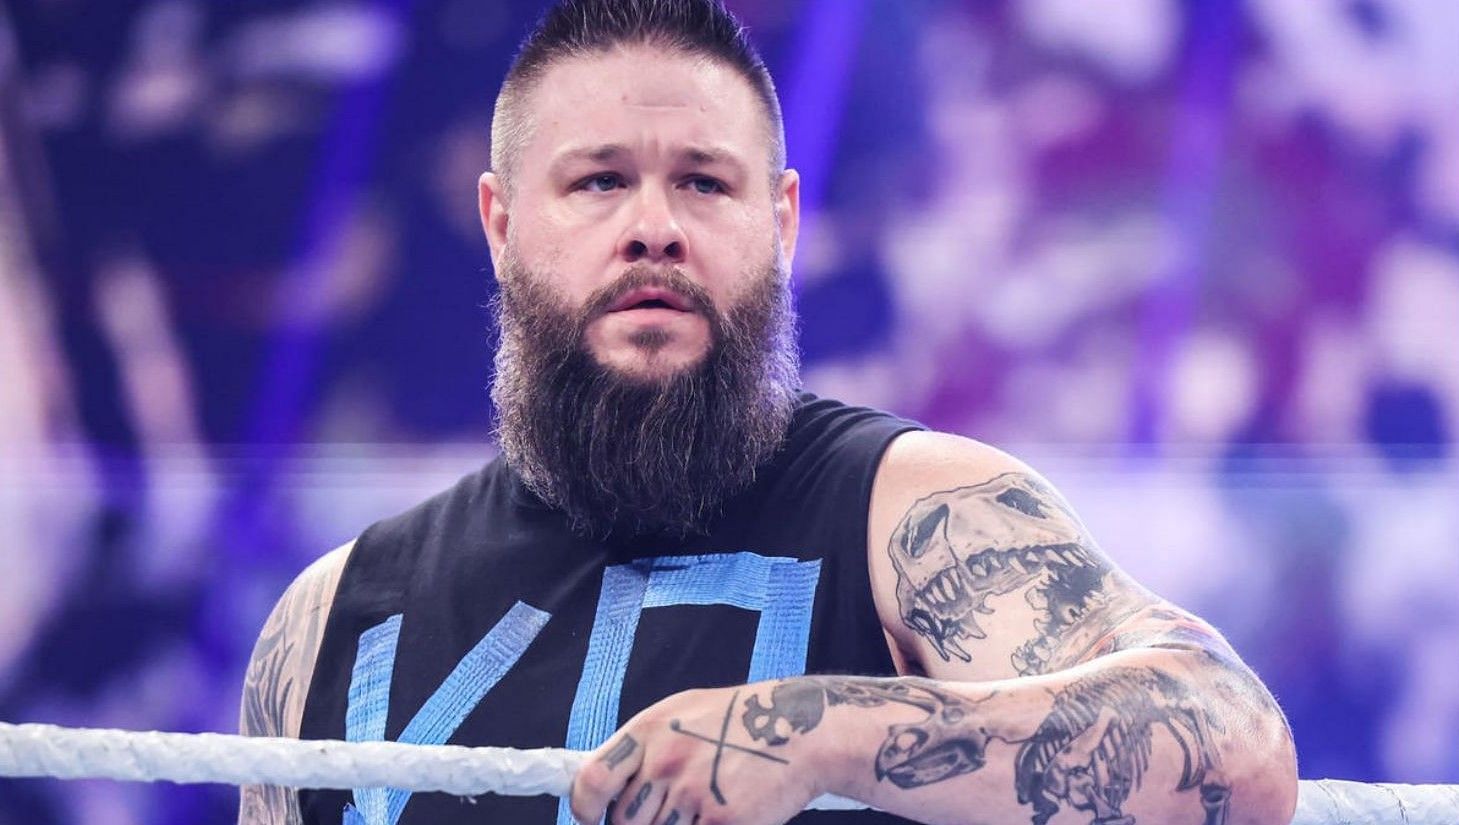 What did Kevin Owens have to say about his split up from Sami Zayn?